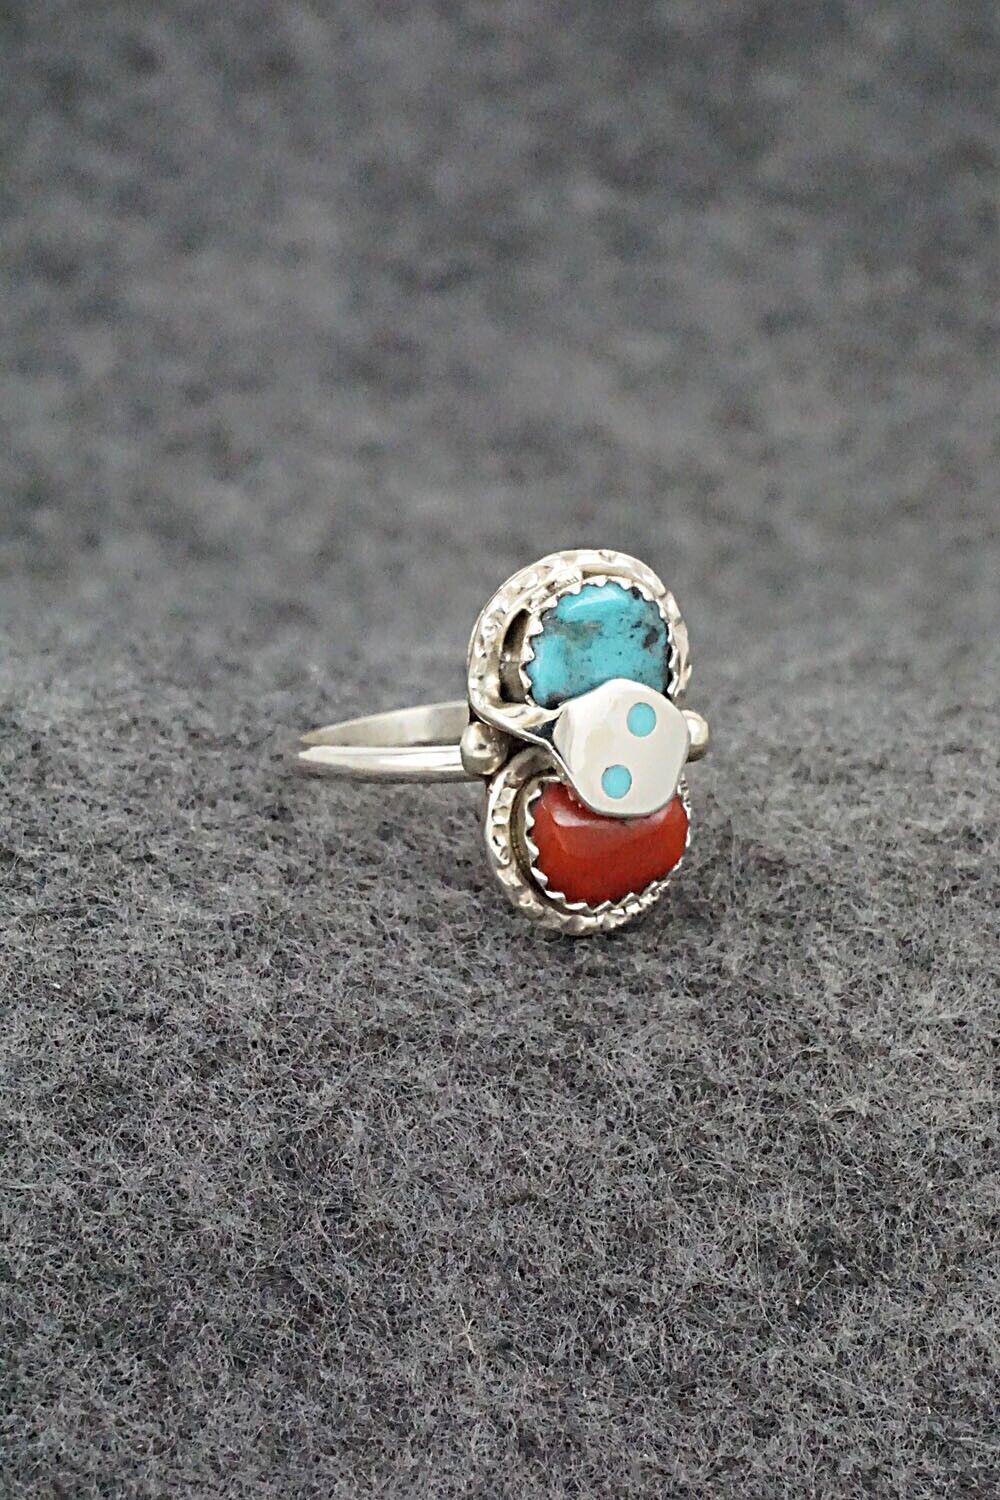 Turquoise, Coral & Sterling Silver Ring - Joy Calavaza - Size 7.5